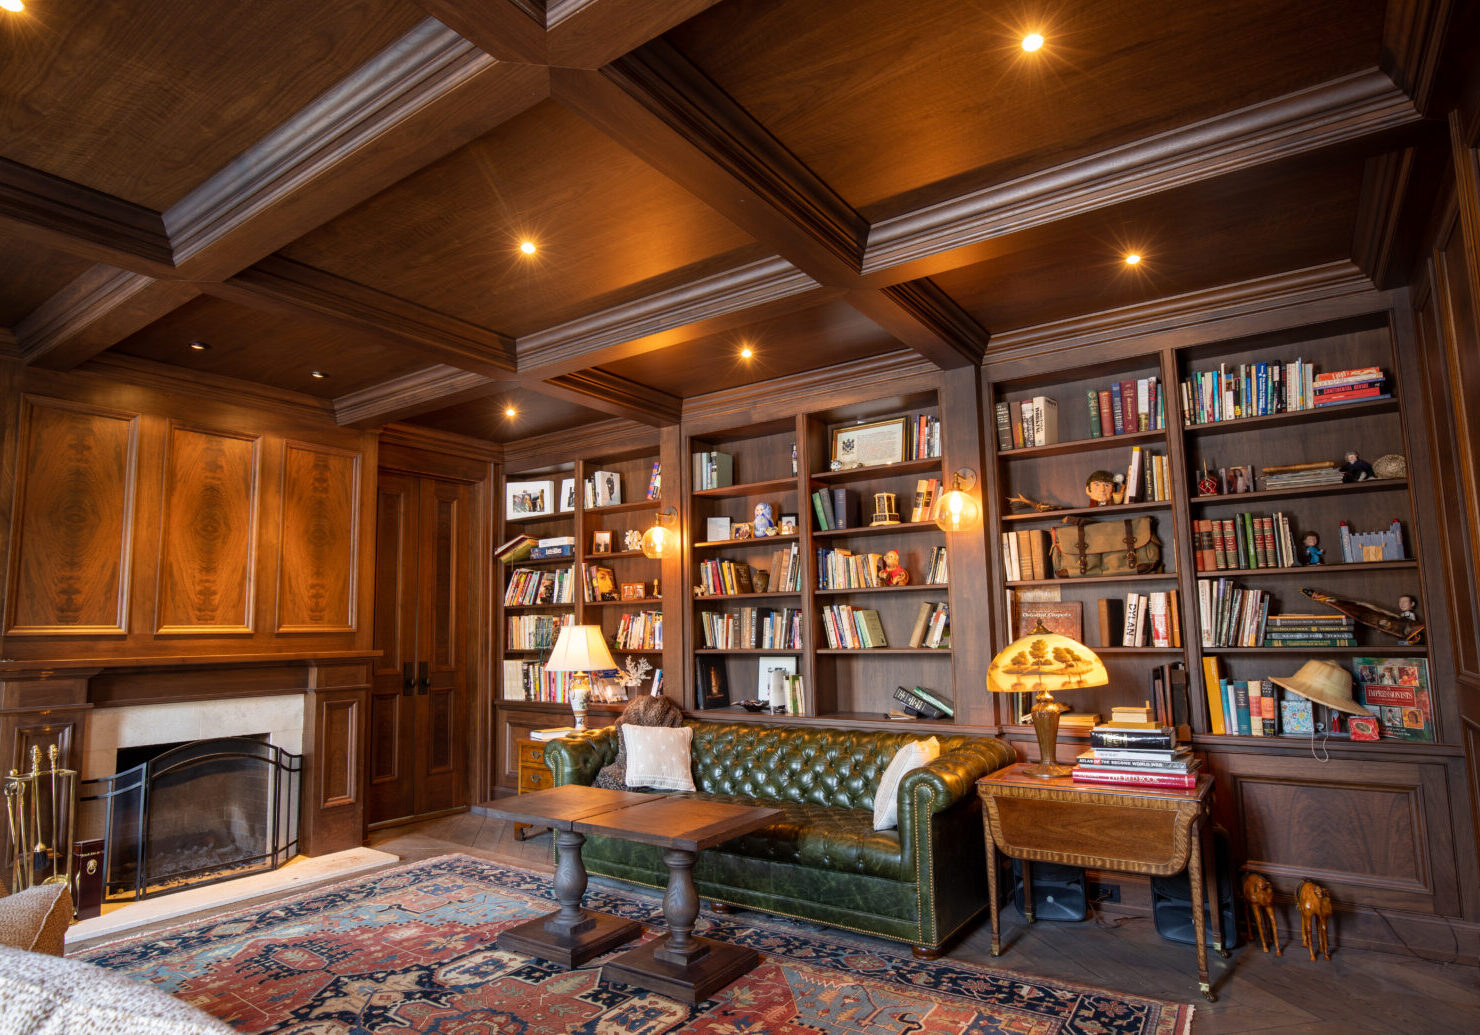 A stunning study room in a residential renovation project by R.E. McNamara Inc., featuring custom-made dark wood shelving filled with books, elegant ceiling accents, and a cozy central sofa that invites you to delve into a good read.